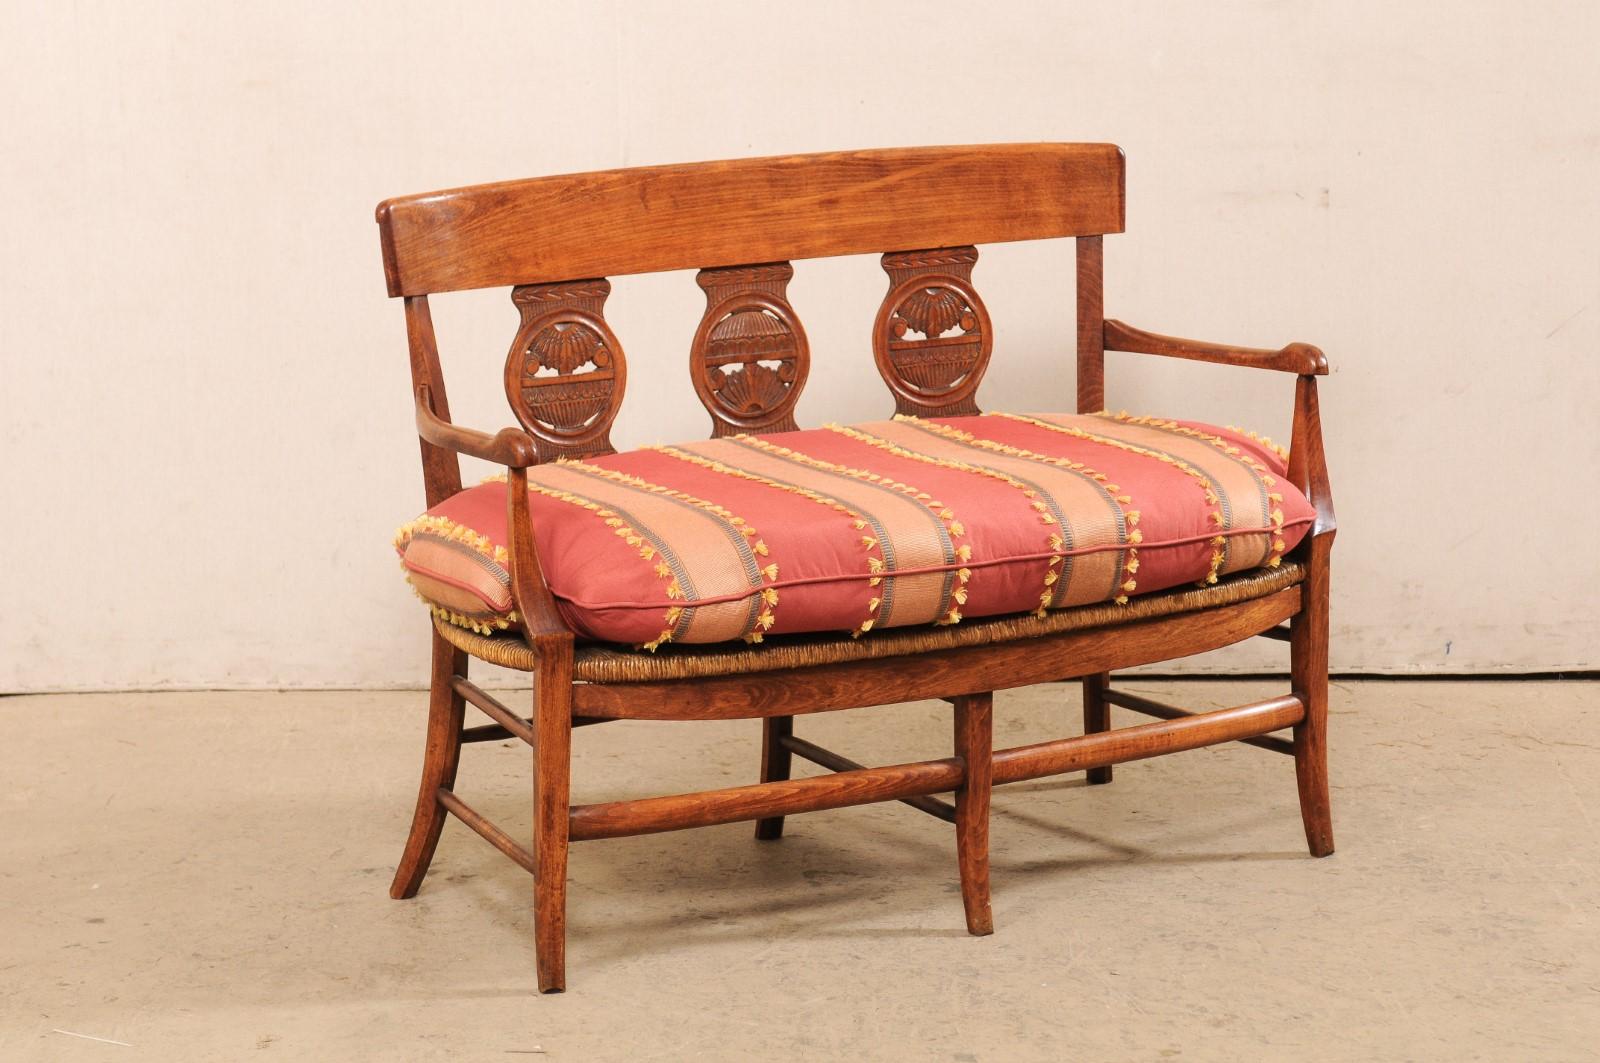 A French carved-wood loveseat with rushed seat from the early 19th century. This antique bench from France features three back-splats carved with circular centers and Neoclassic influences, set within a more French country frame consisting of clean,